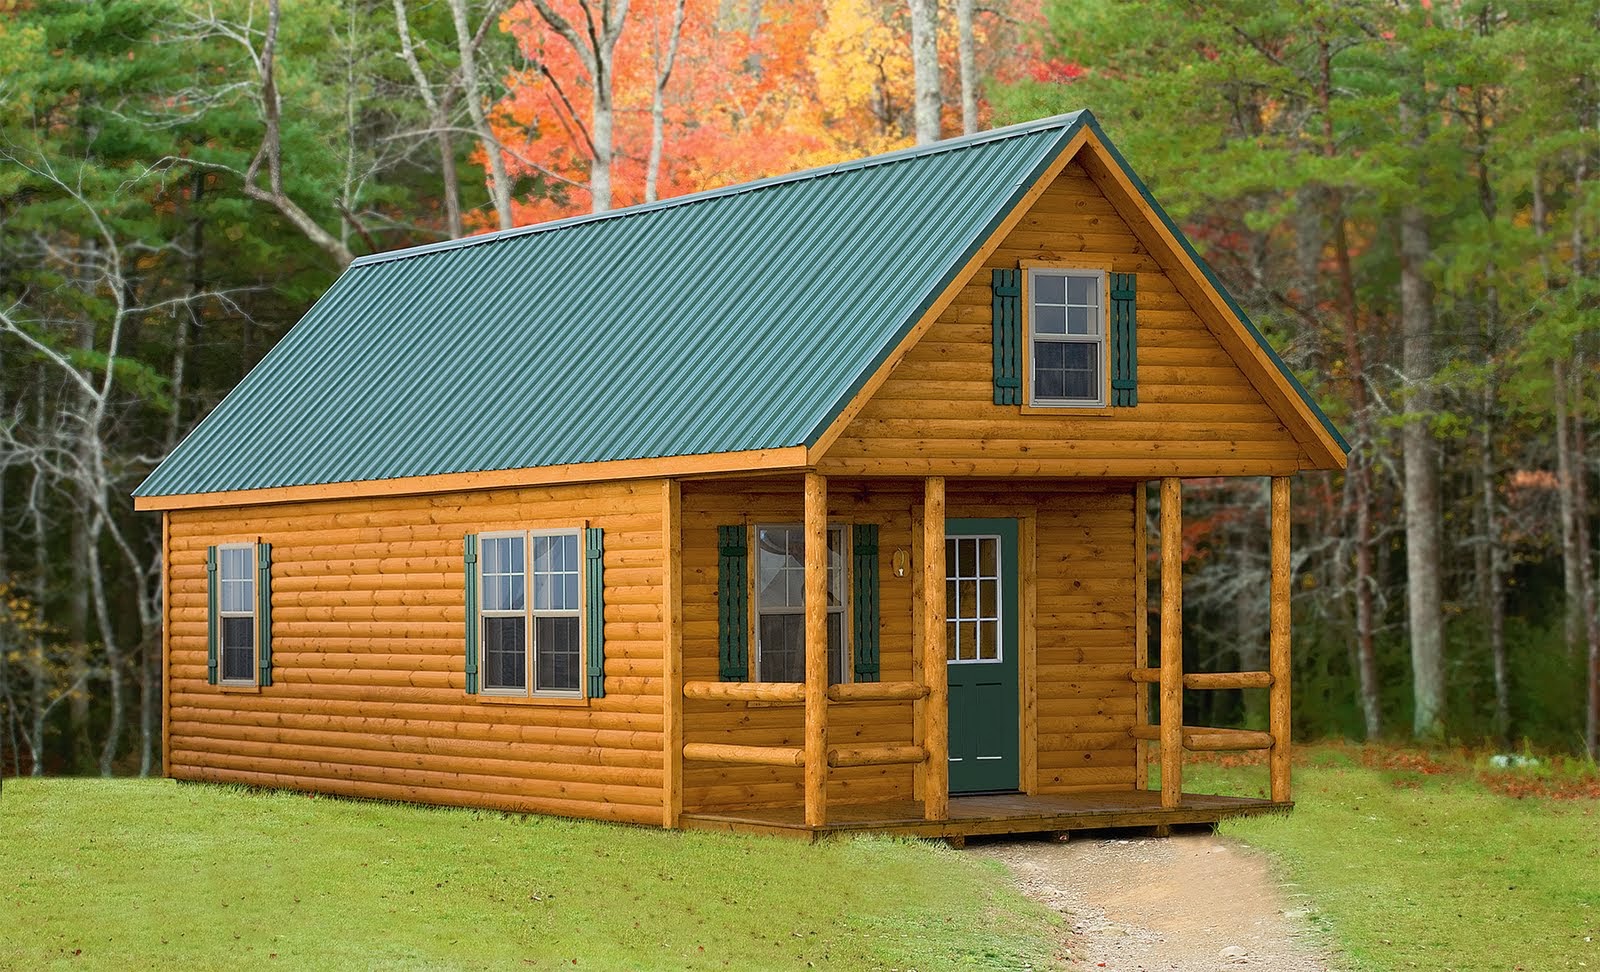 Home Depot 10X12 Shed Plans in addition Home Depot Tiny House Shed 